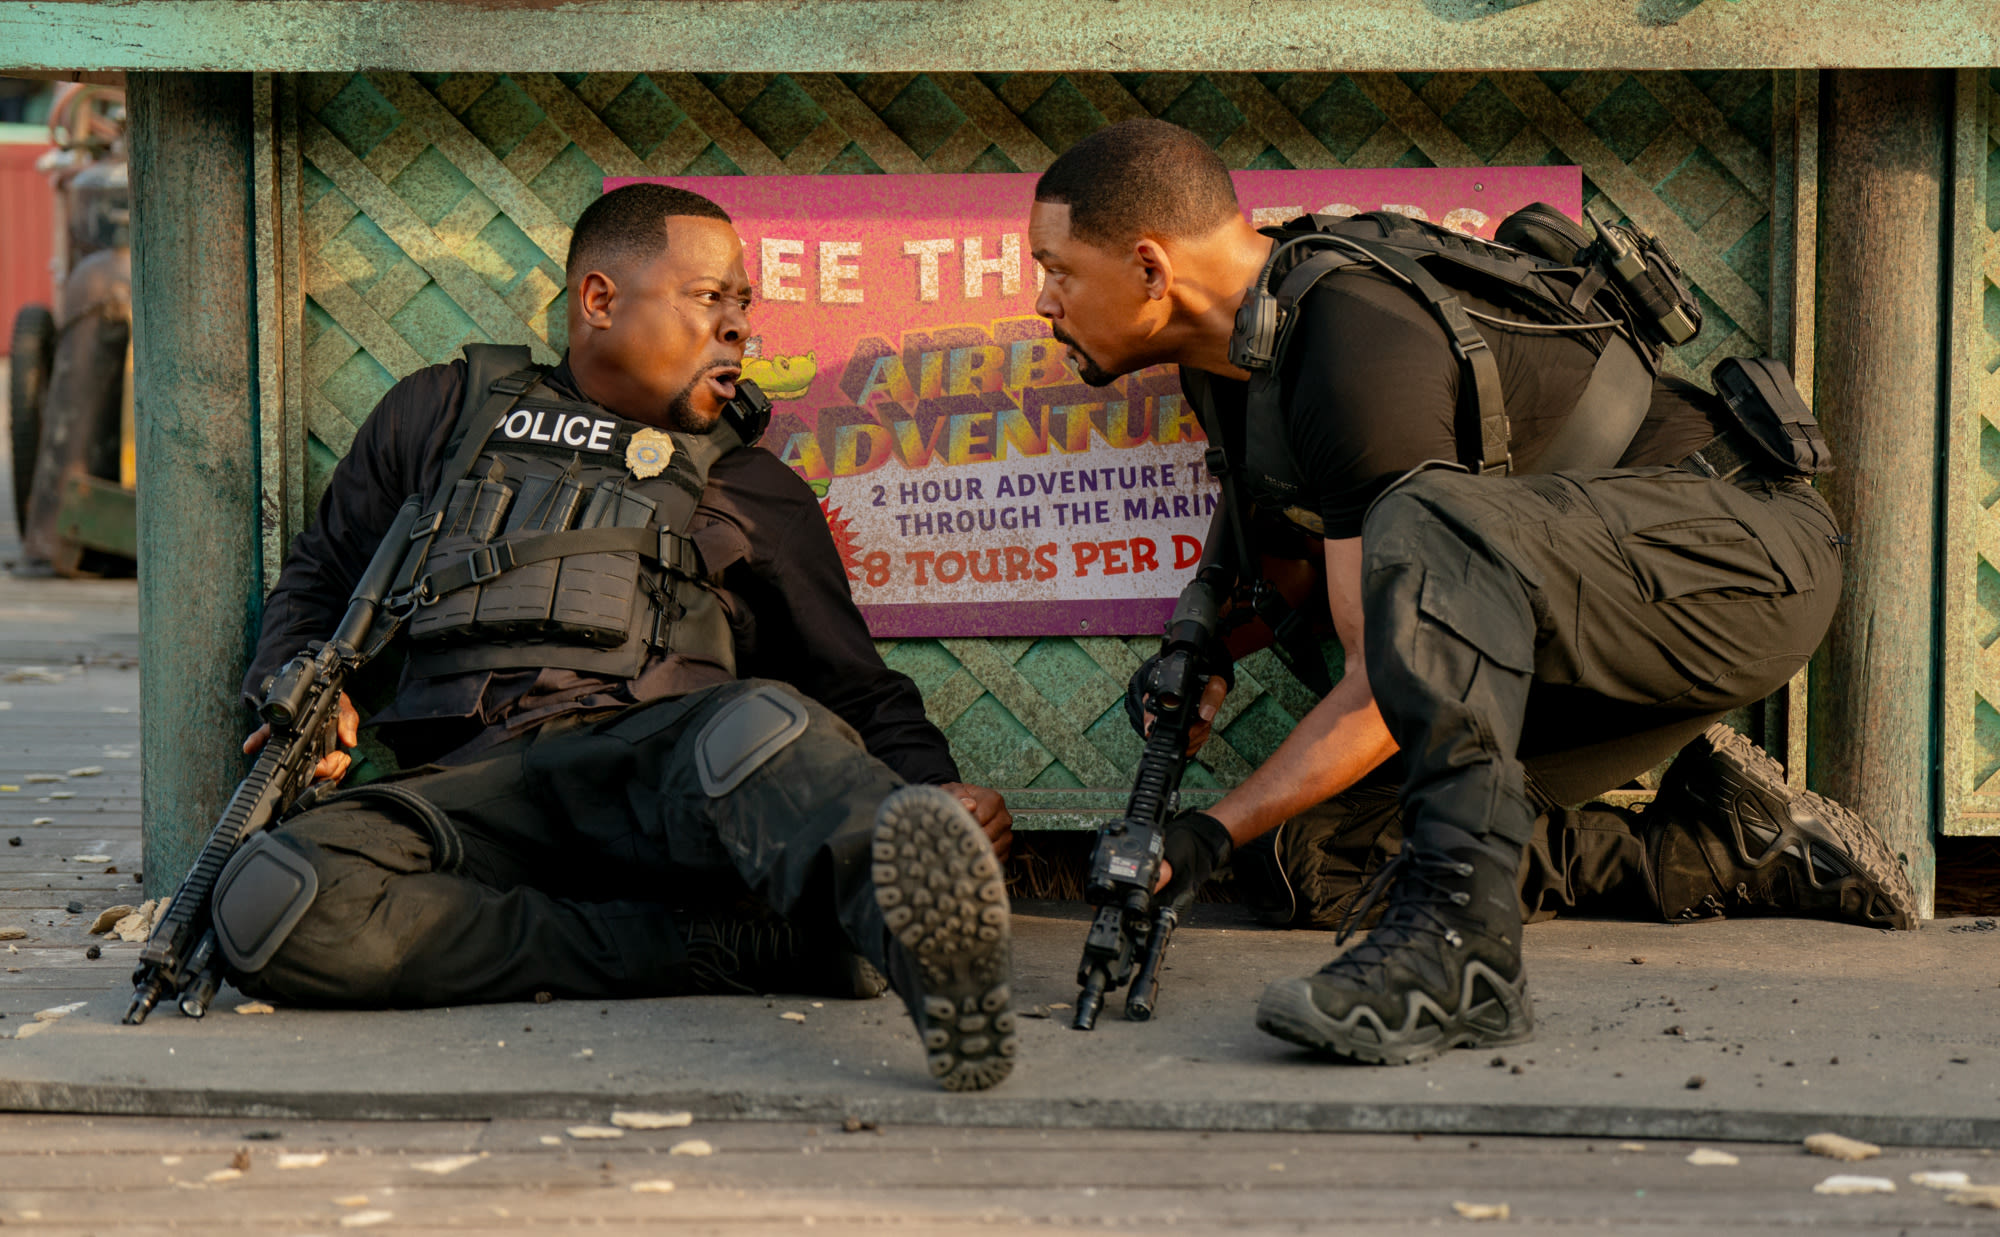 ‘Bad Boys: Ride Or Die’ Hopes To Avoid Speed Bump At Sluggish Summer Box Office With $75M+ Global Opening – Preview